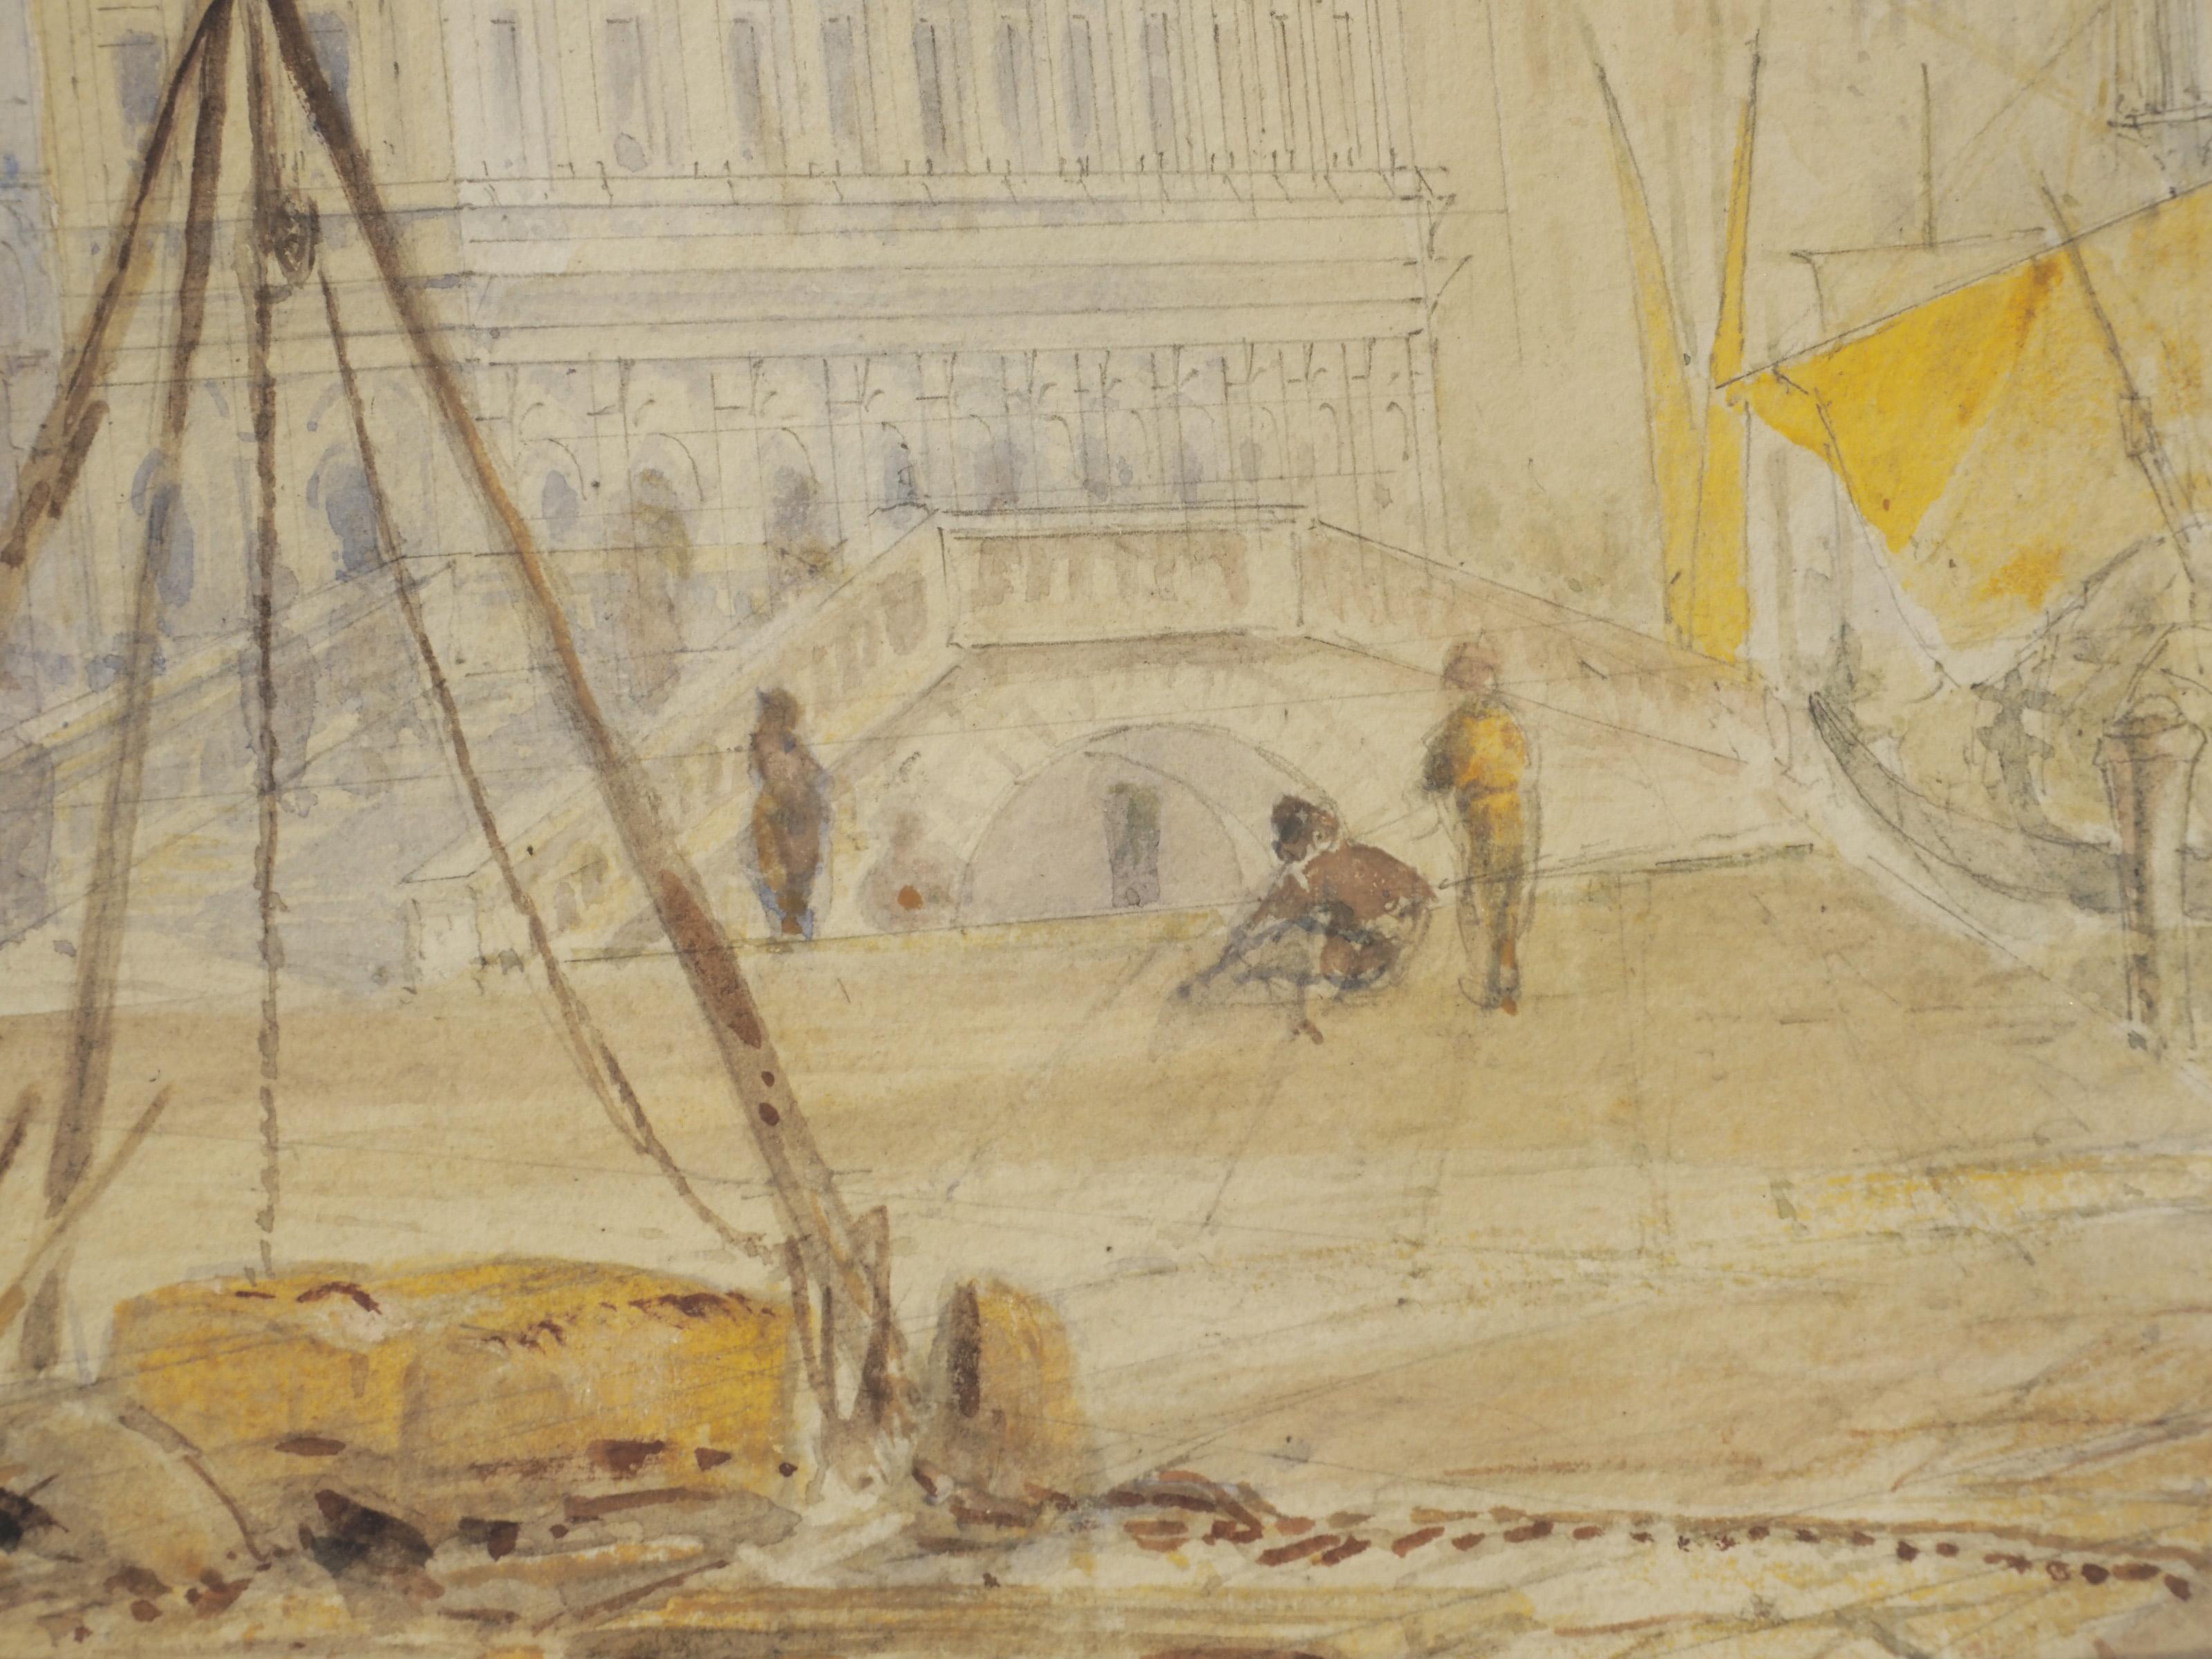 Paper Aquarelle view of Venice by late-XIX-century artist For Sale